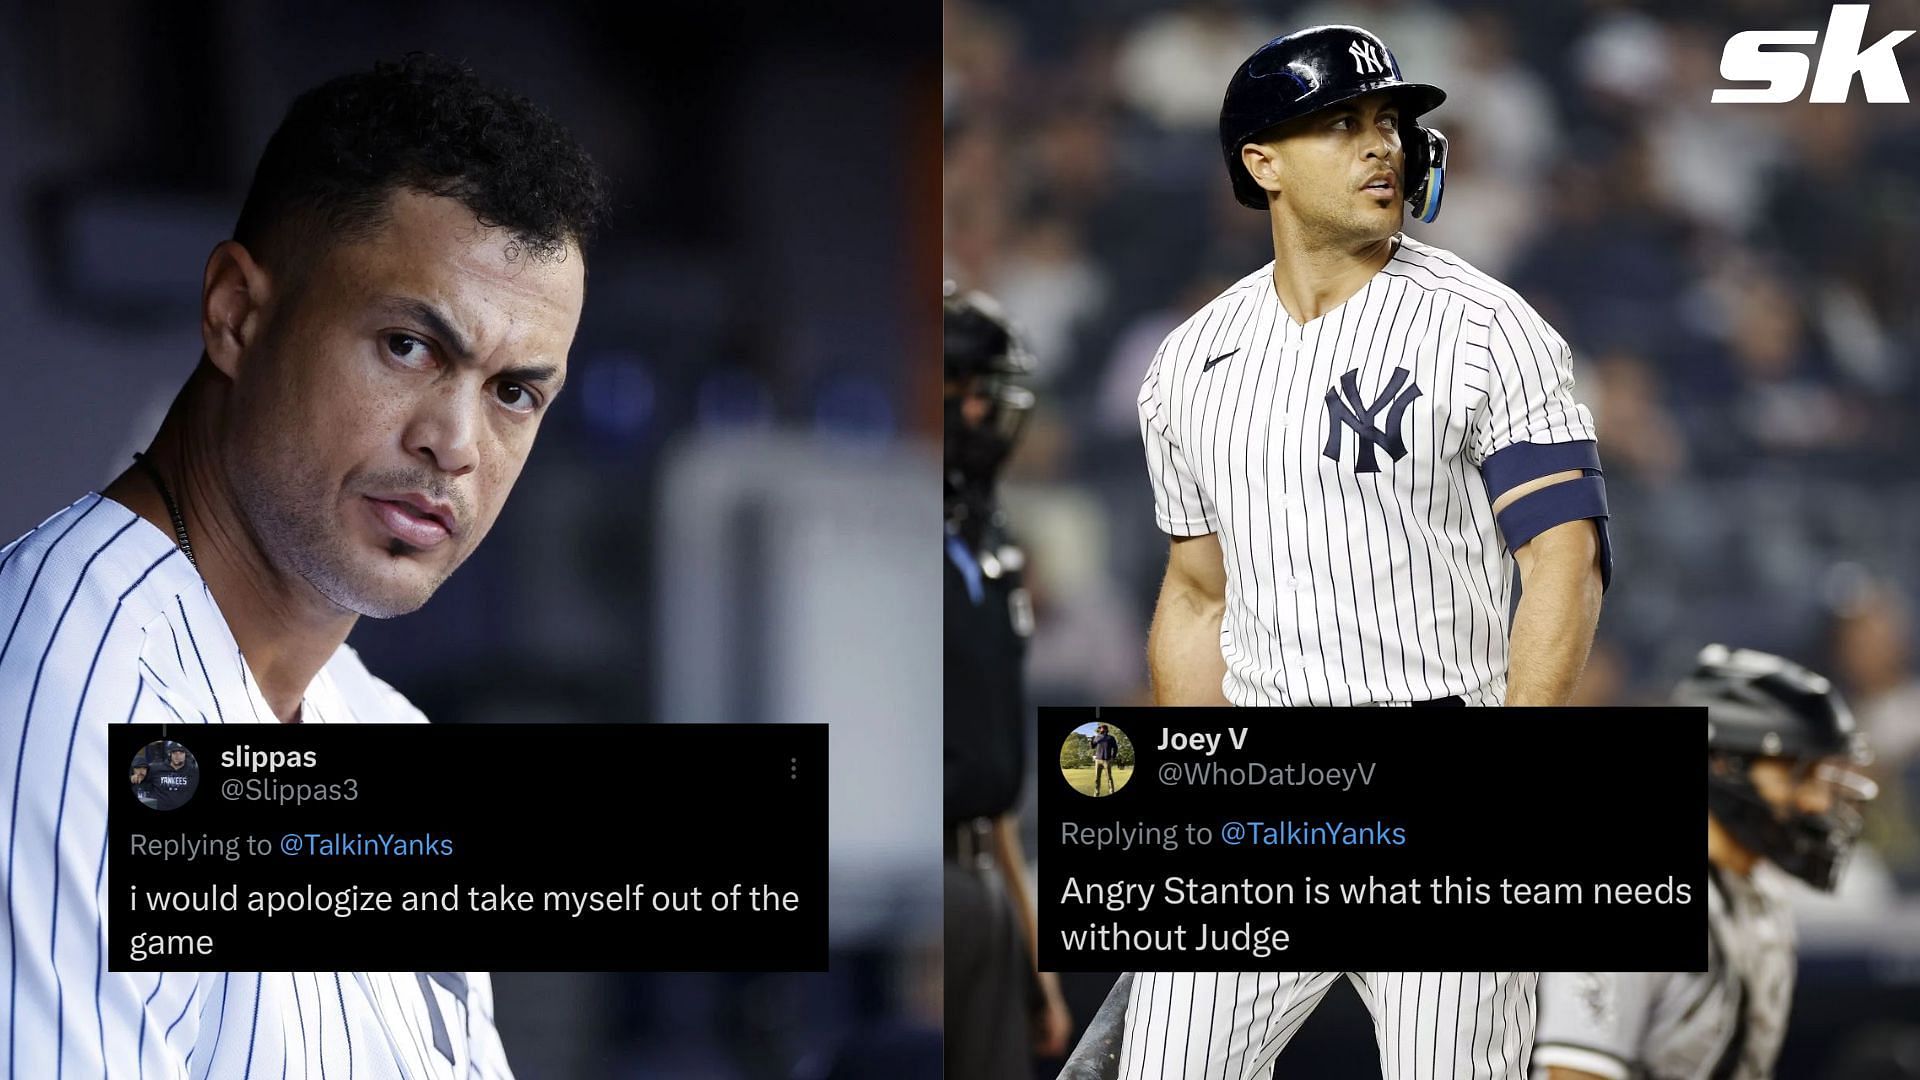 Yankees' Giancarlo Stanton wants doctored baseballs out of game